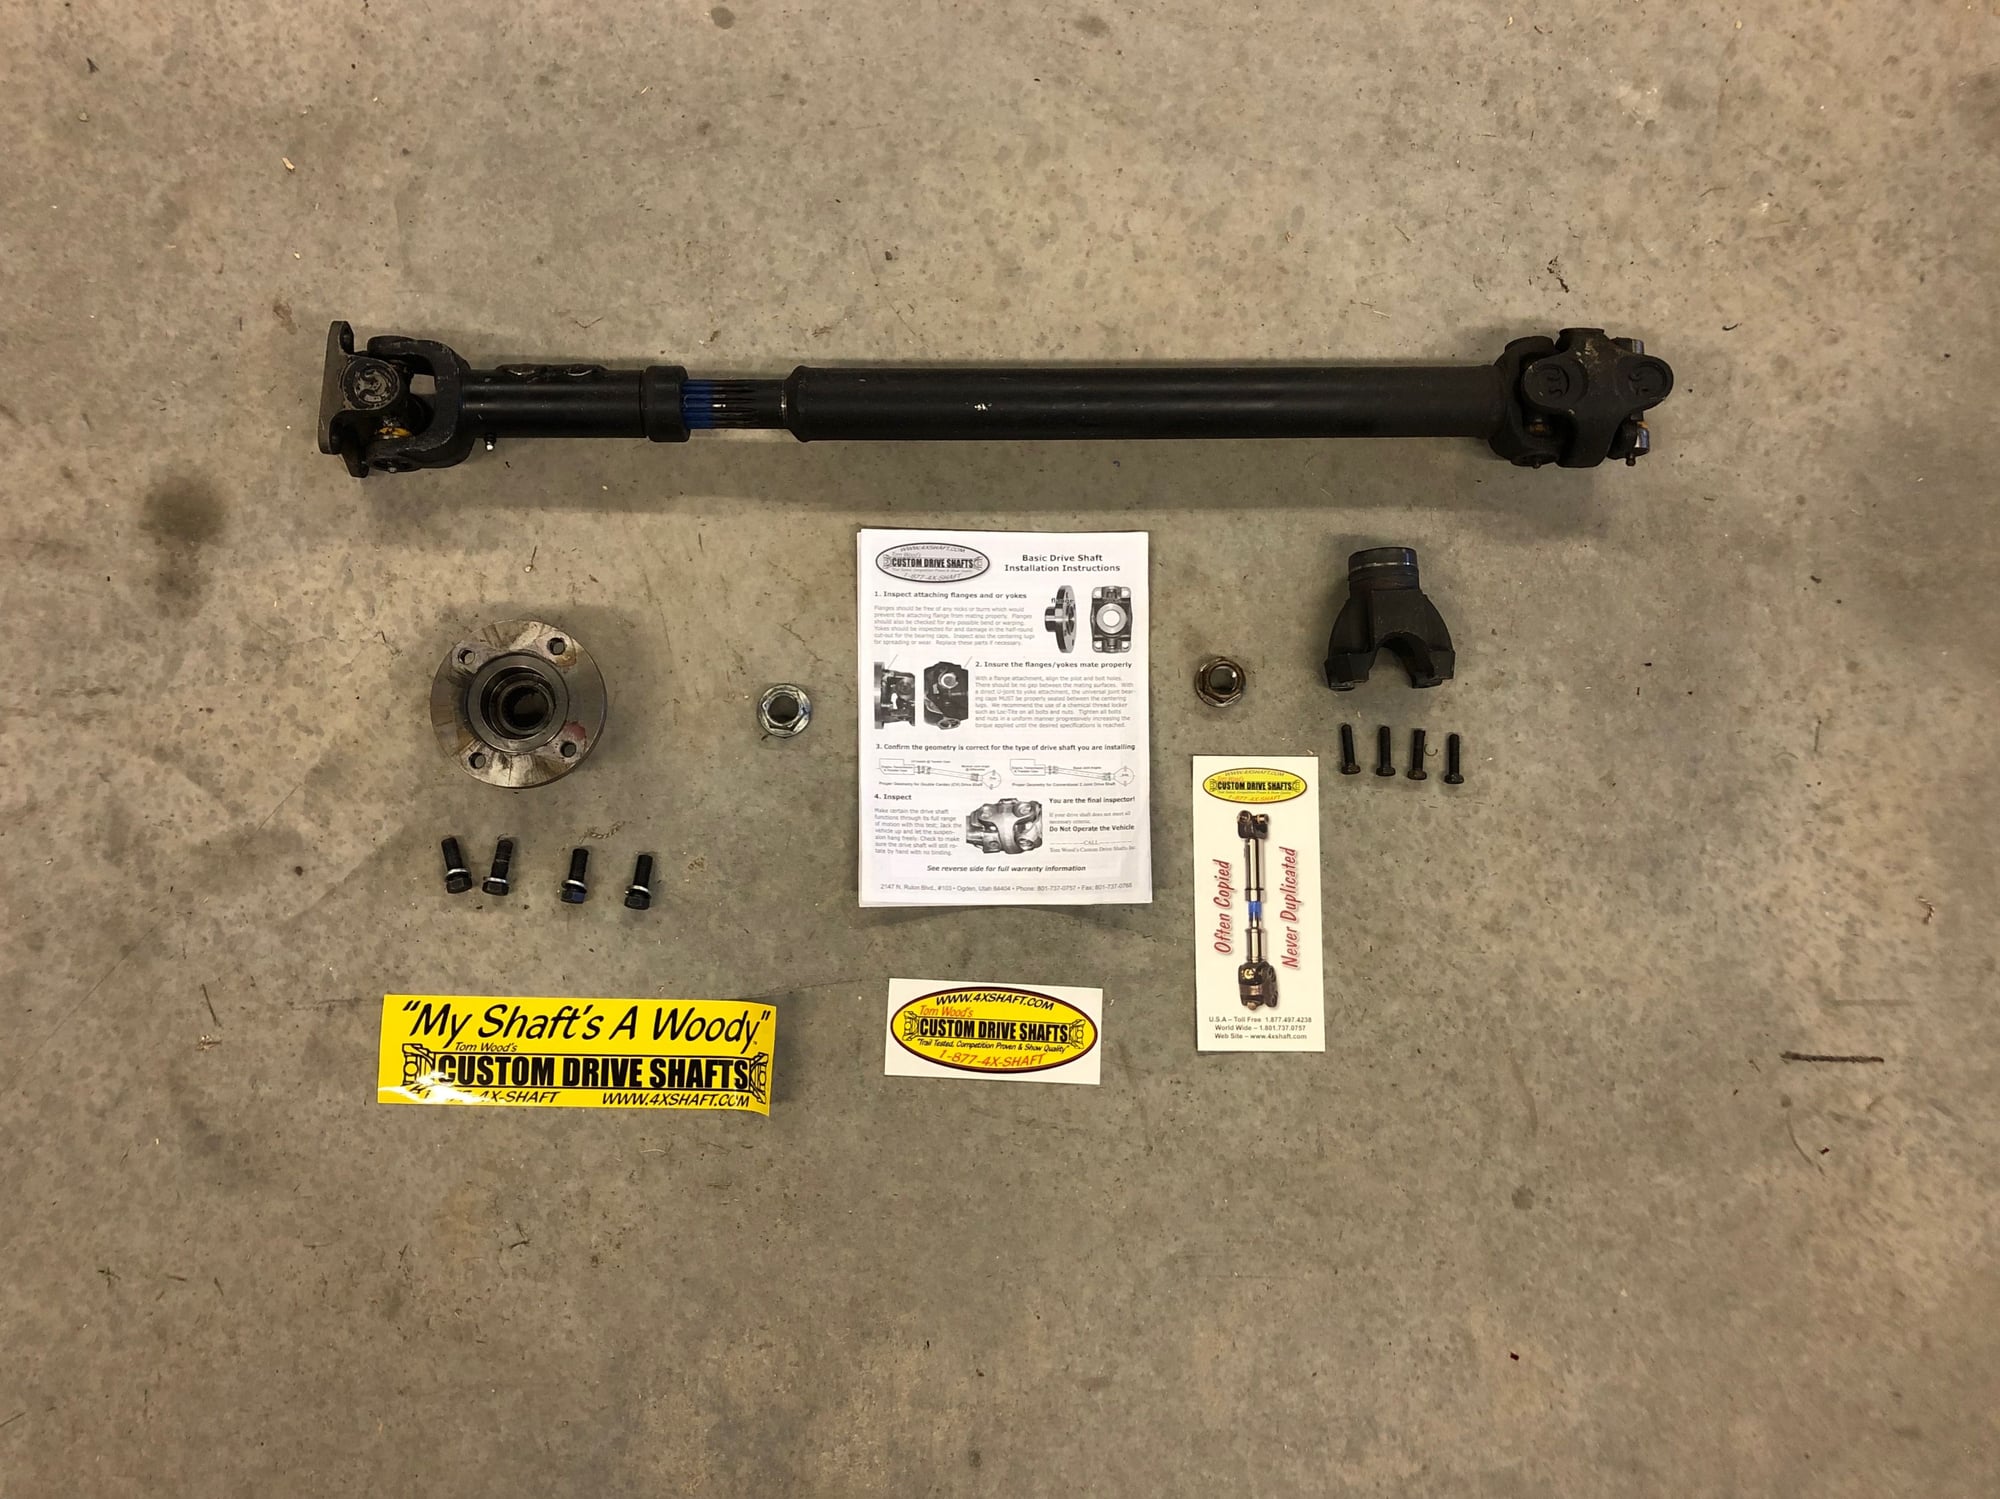 Drivetrain - Tom Woods 1310 Front Driveshaft Jeep Wrangler Unlimited 2007-2011 - Used - 2007 to 2011 Jeep Wrangler - Sioux Center, IA 51250, United States